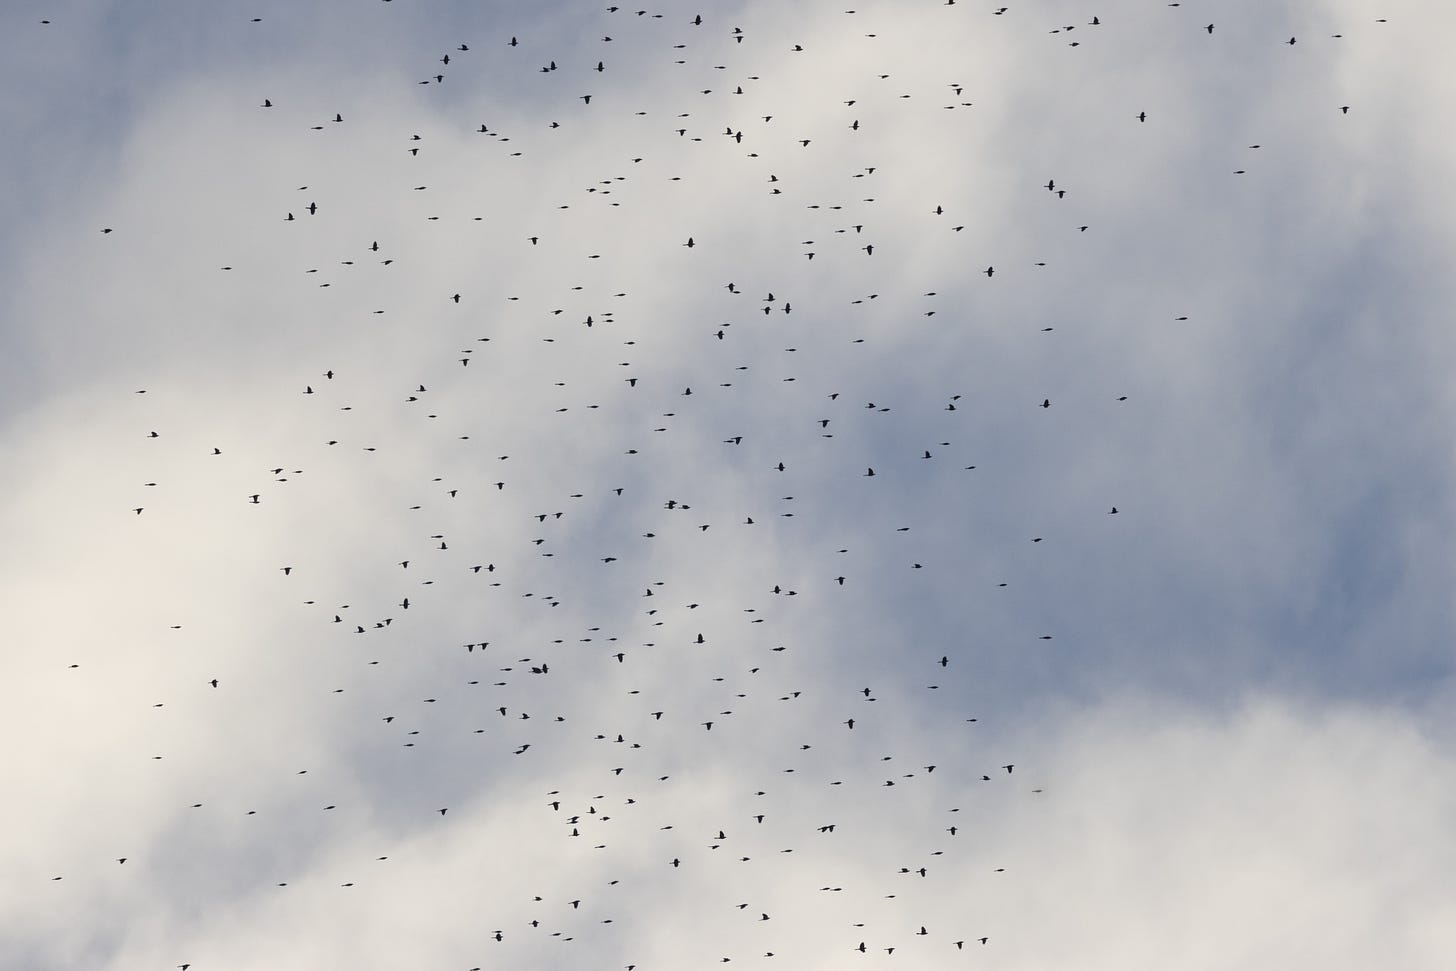 hundreds of black bird-shaped specks flying to the right against a cloudy sky